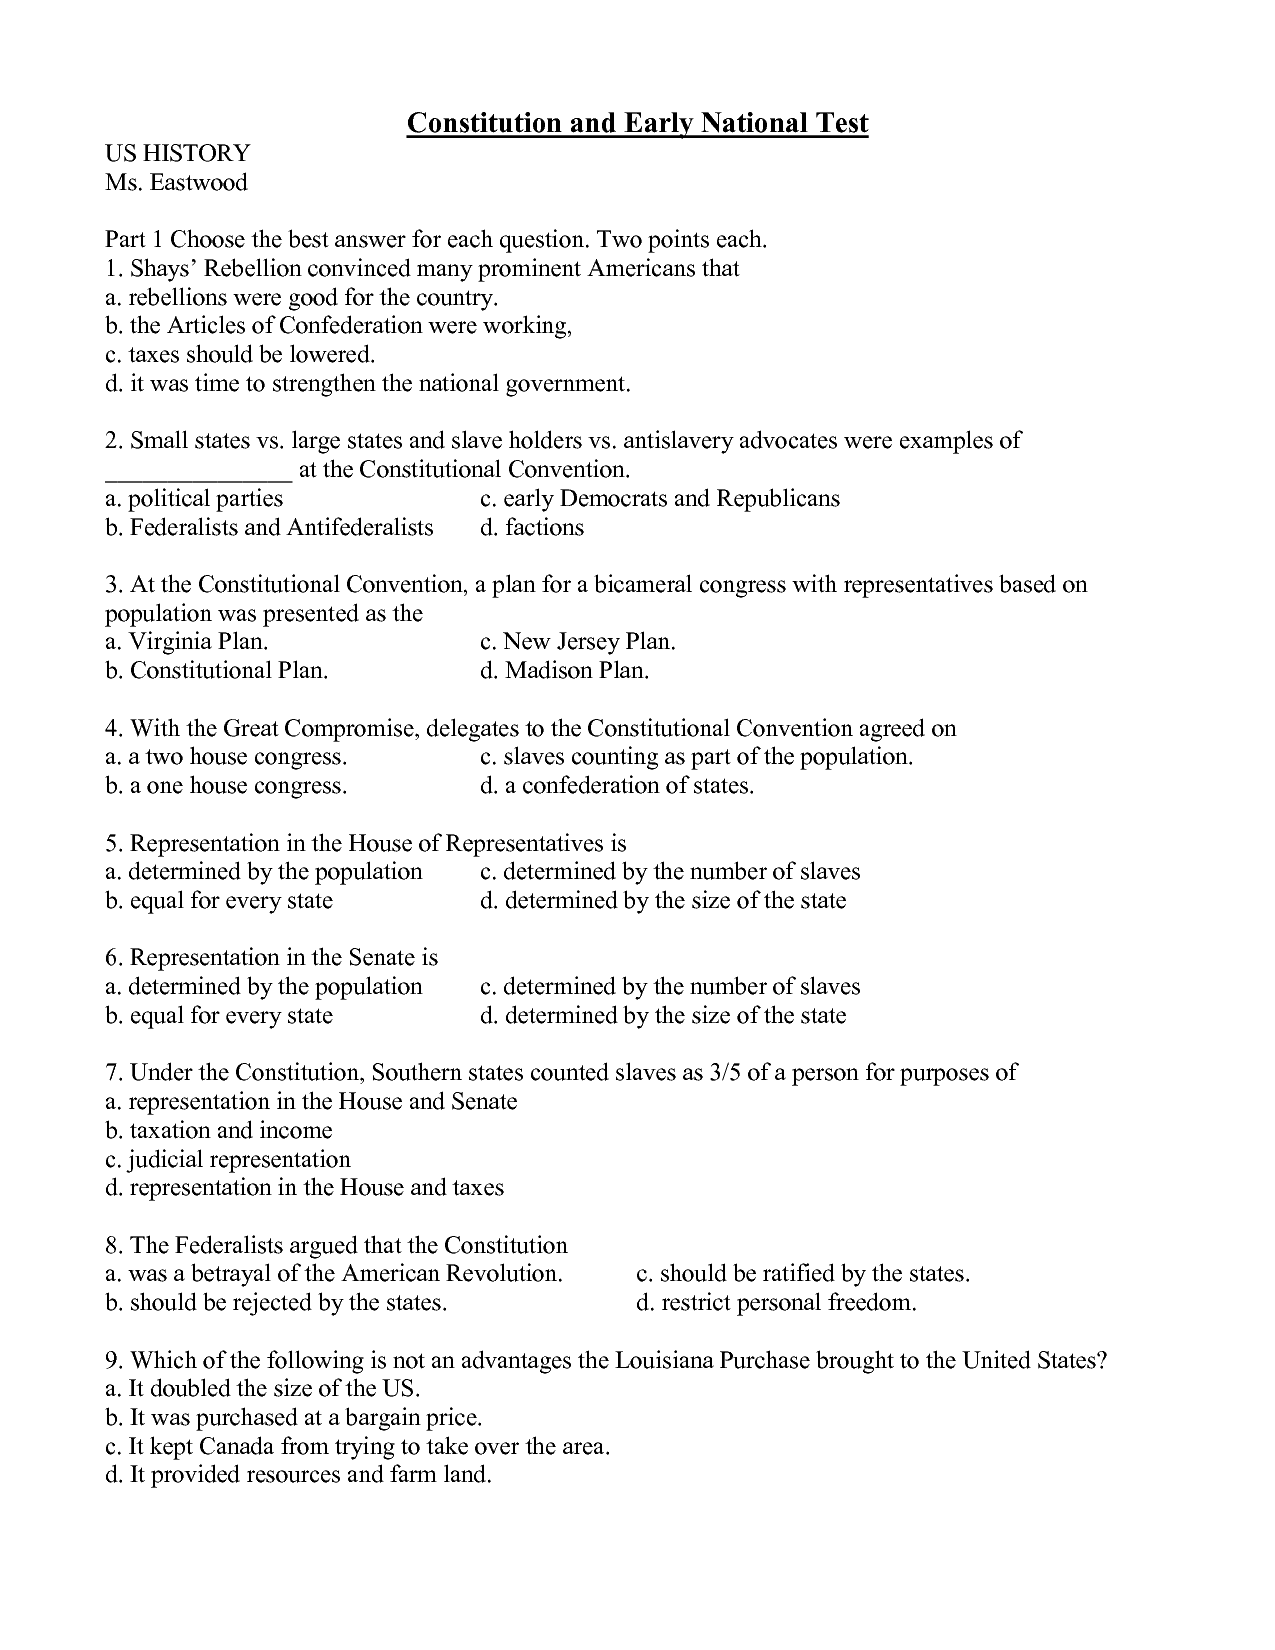 Constitution vs Articles of Confederation Worksheet Image